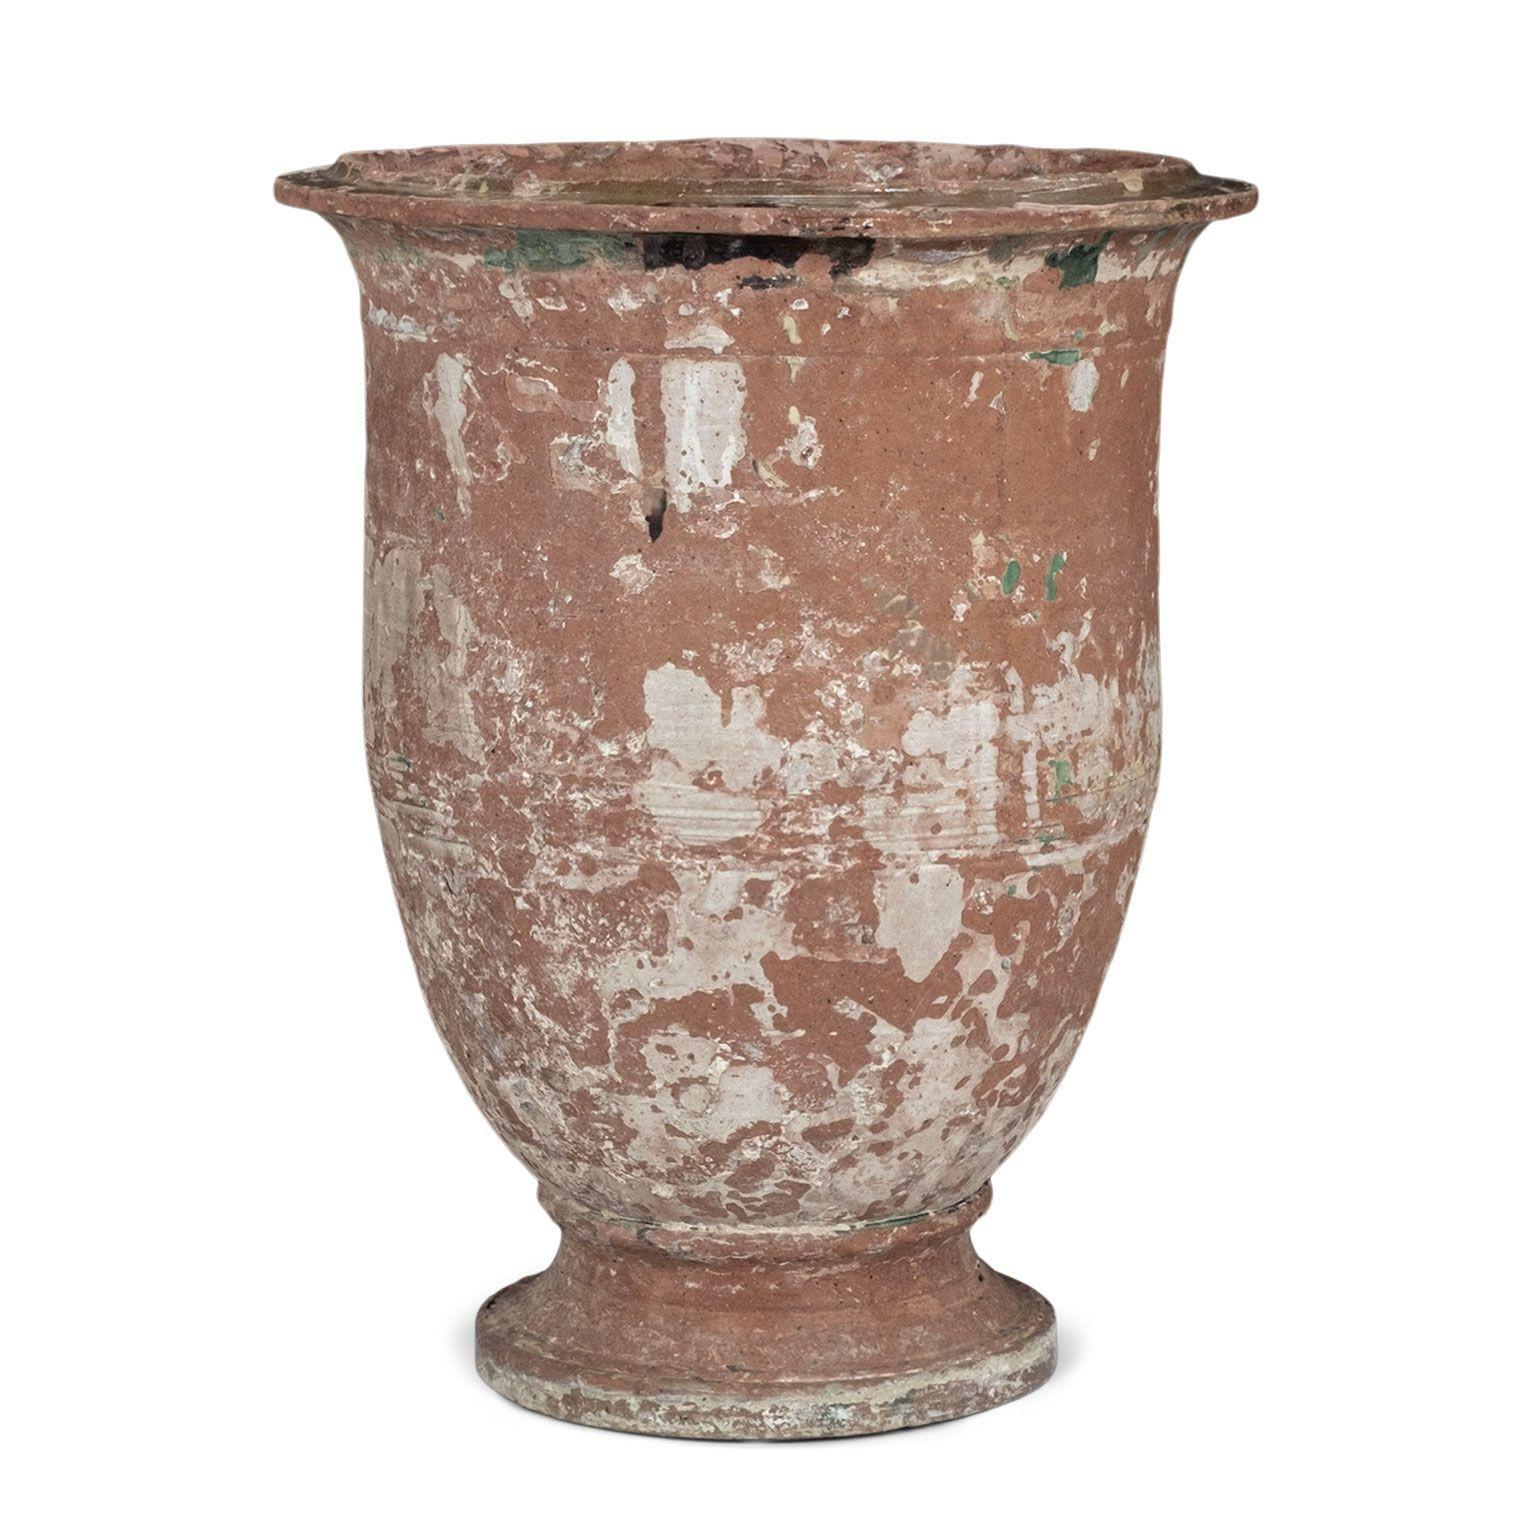 Terracotta Mid-19th Century Anduze Jar For Sale